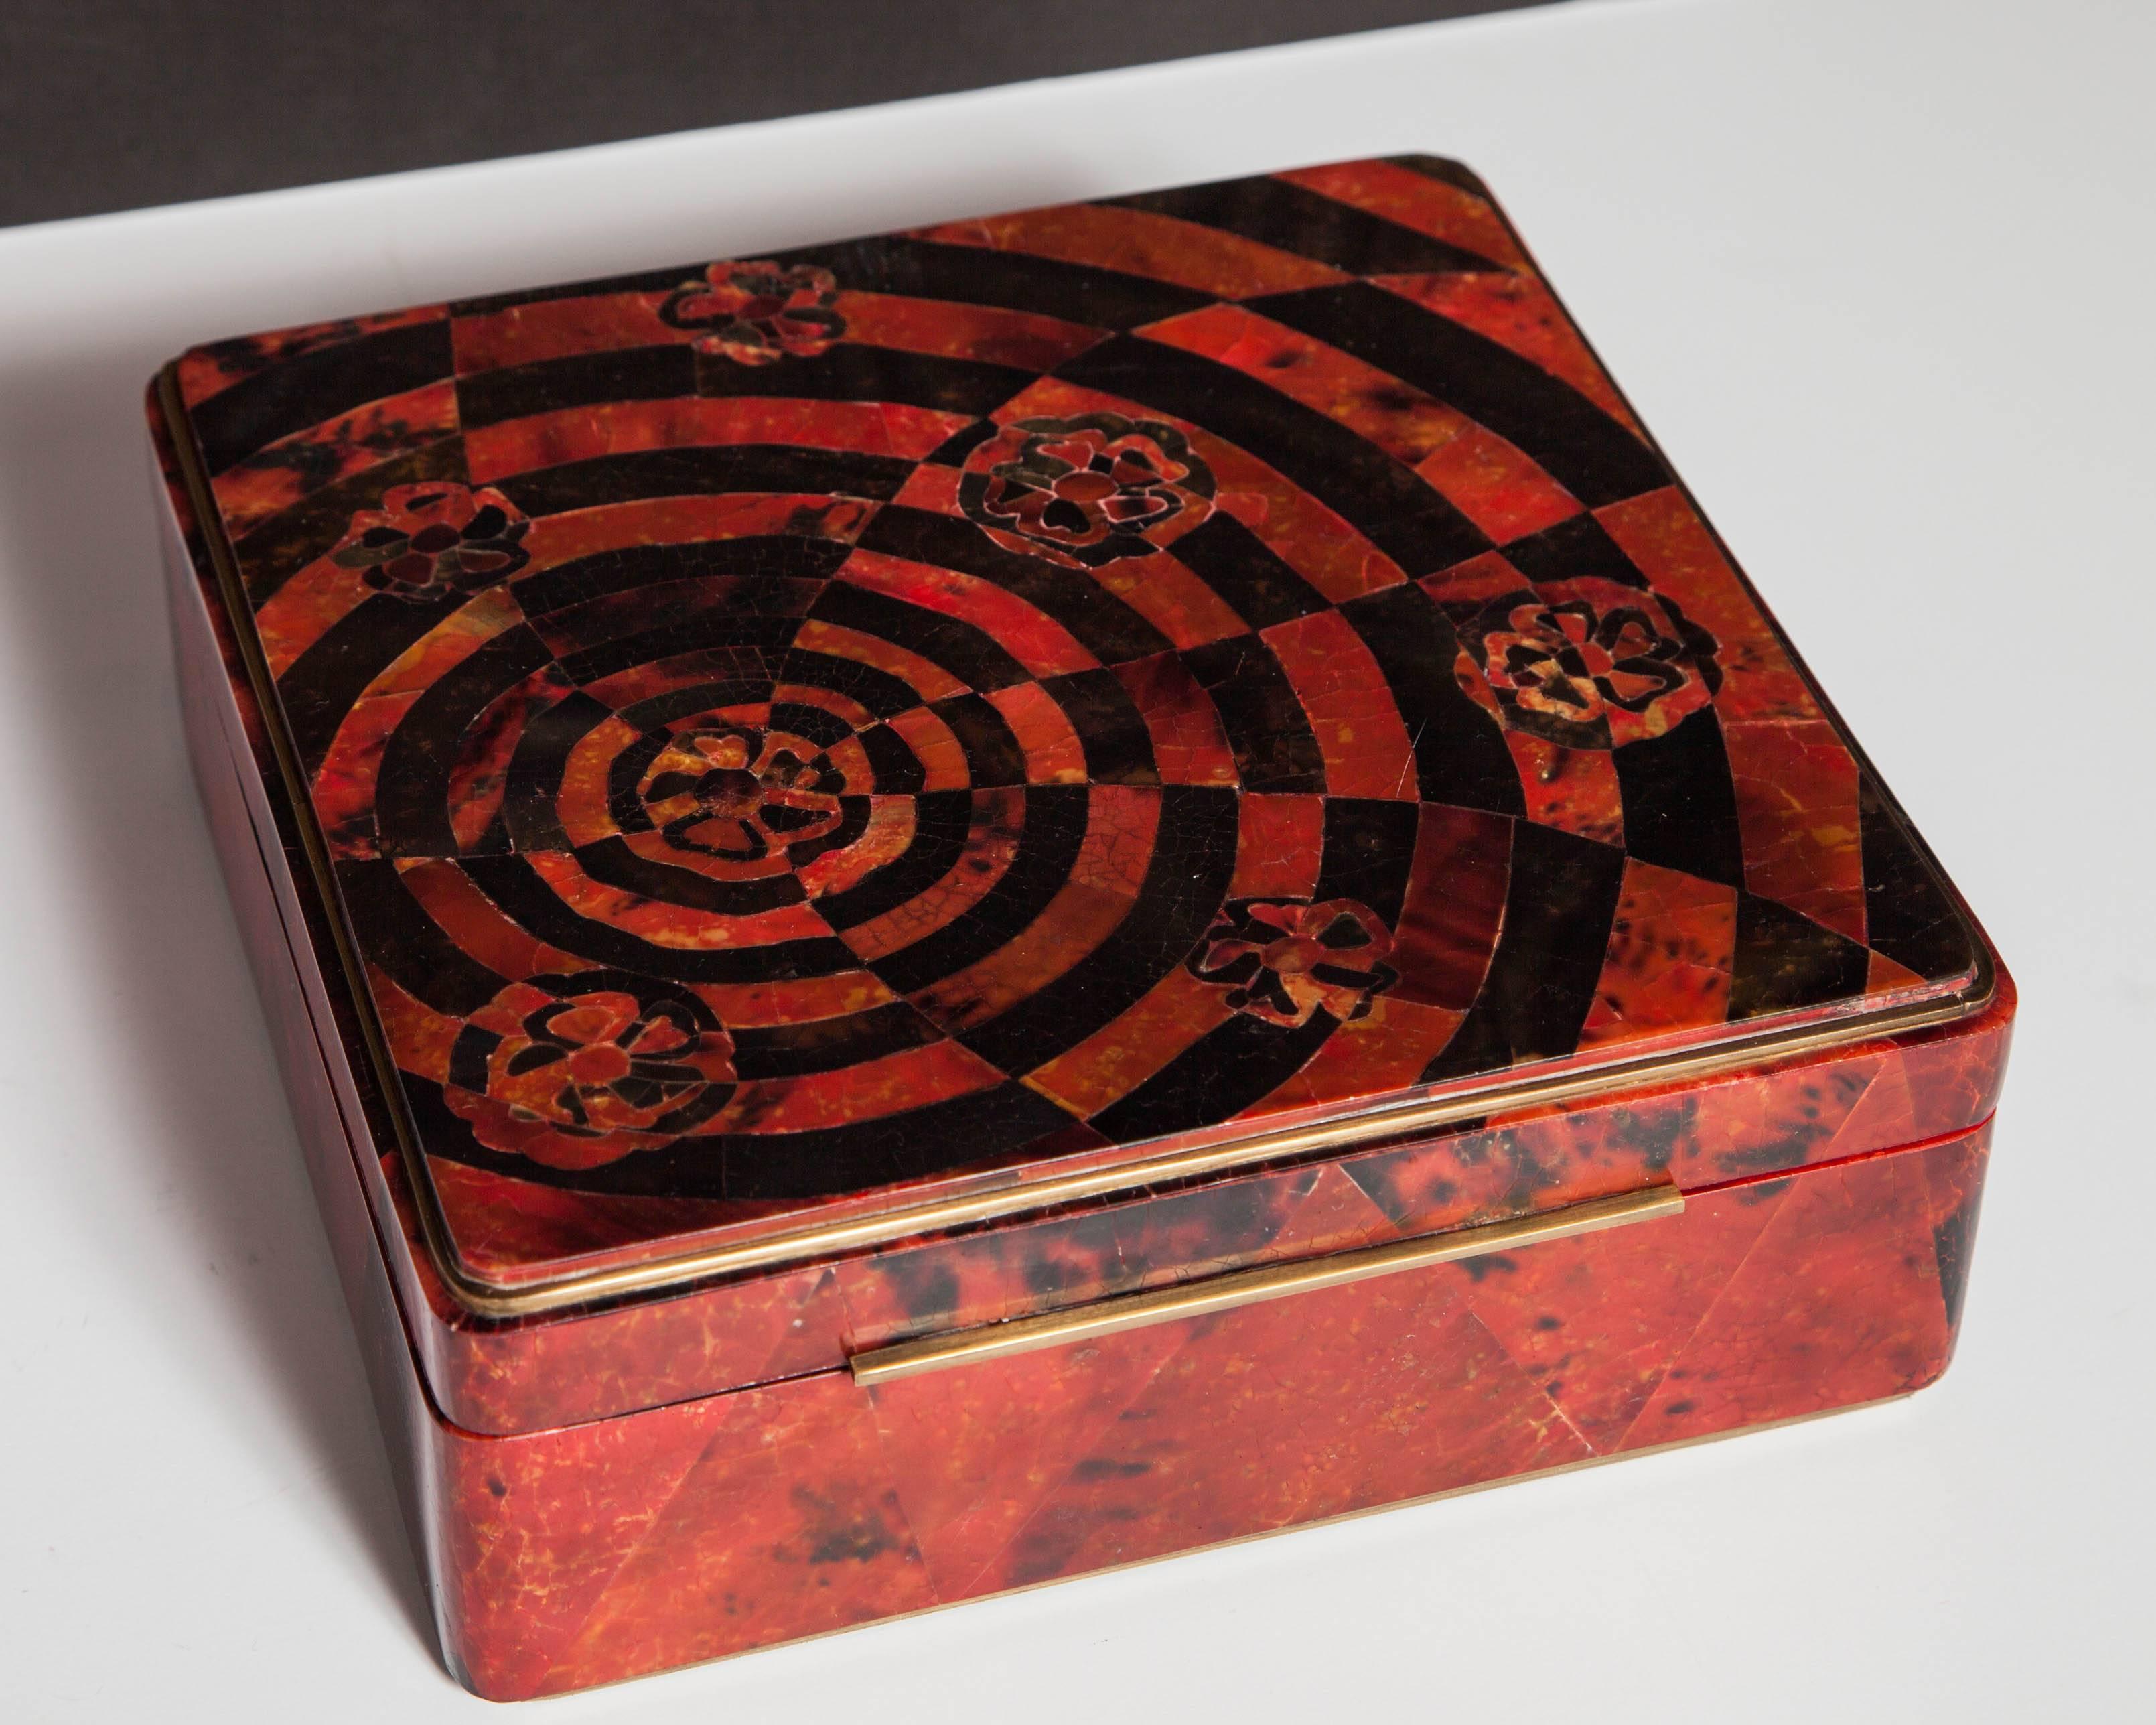 20th Century Pen Shell Box in Ruby Red with Geometric Inlay Design